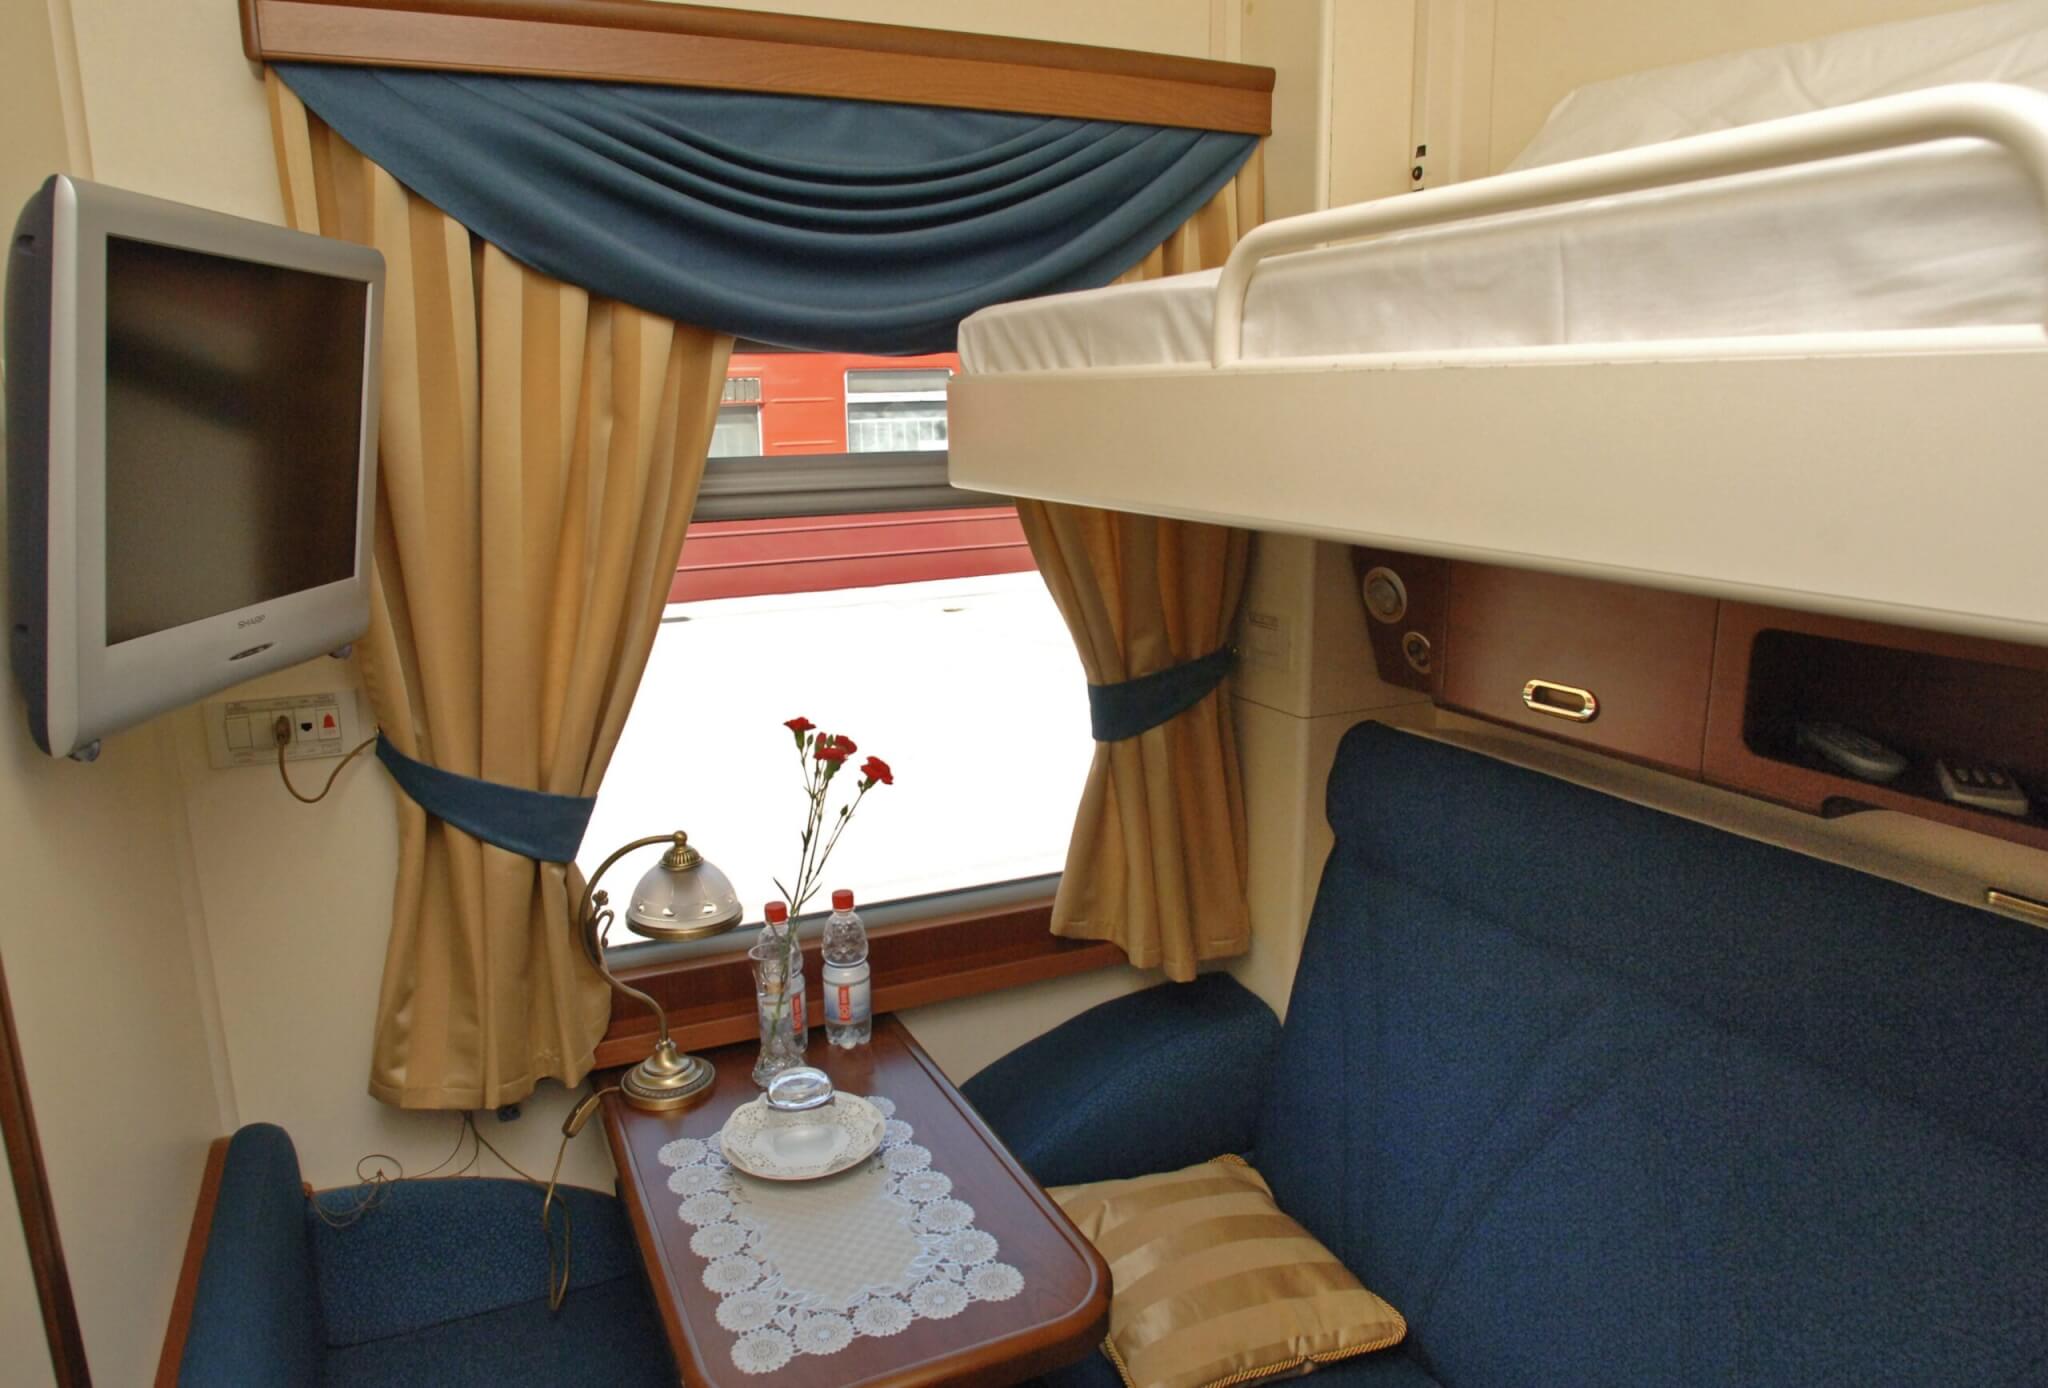 Moscow, Russia, June 5, 2007, compartment on the golden eagle trans-siberian express, Russiai´s first fully en-suite private train, launched by the uk-based long-distance luxury train operator gw travel limited to serve the world's longest railway line between Moscow and Vladivostok.